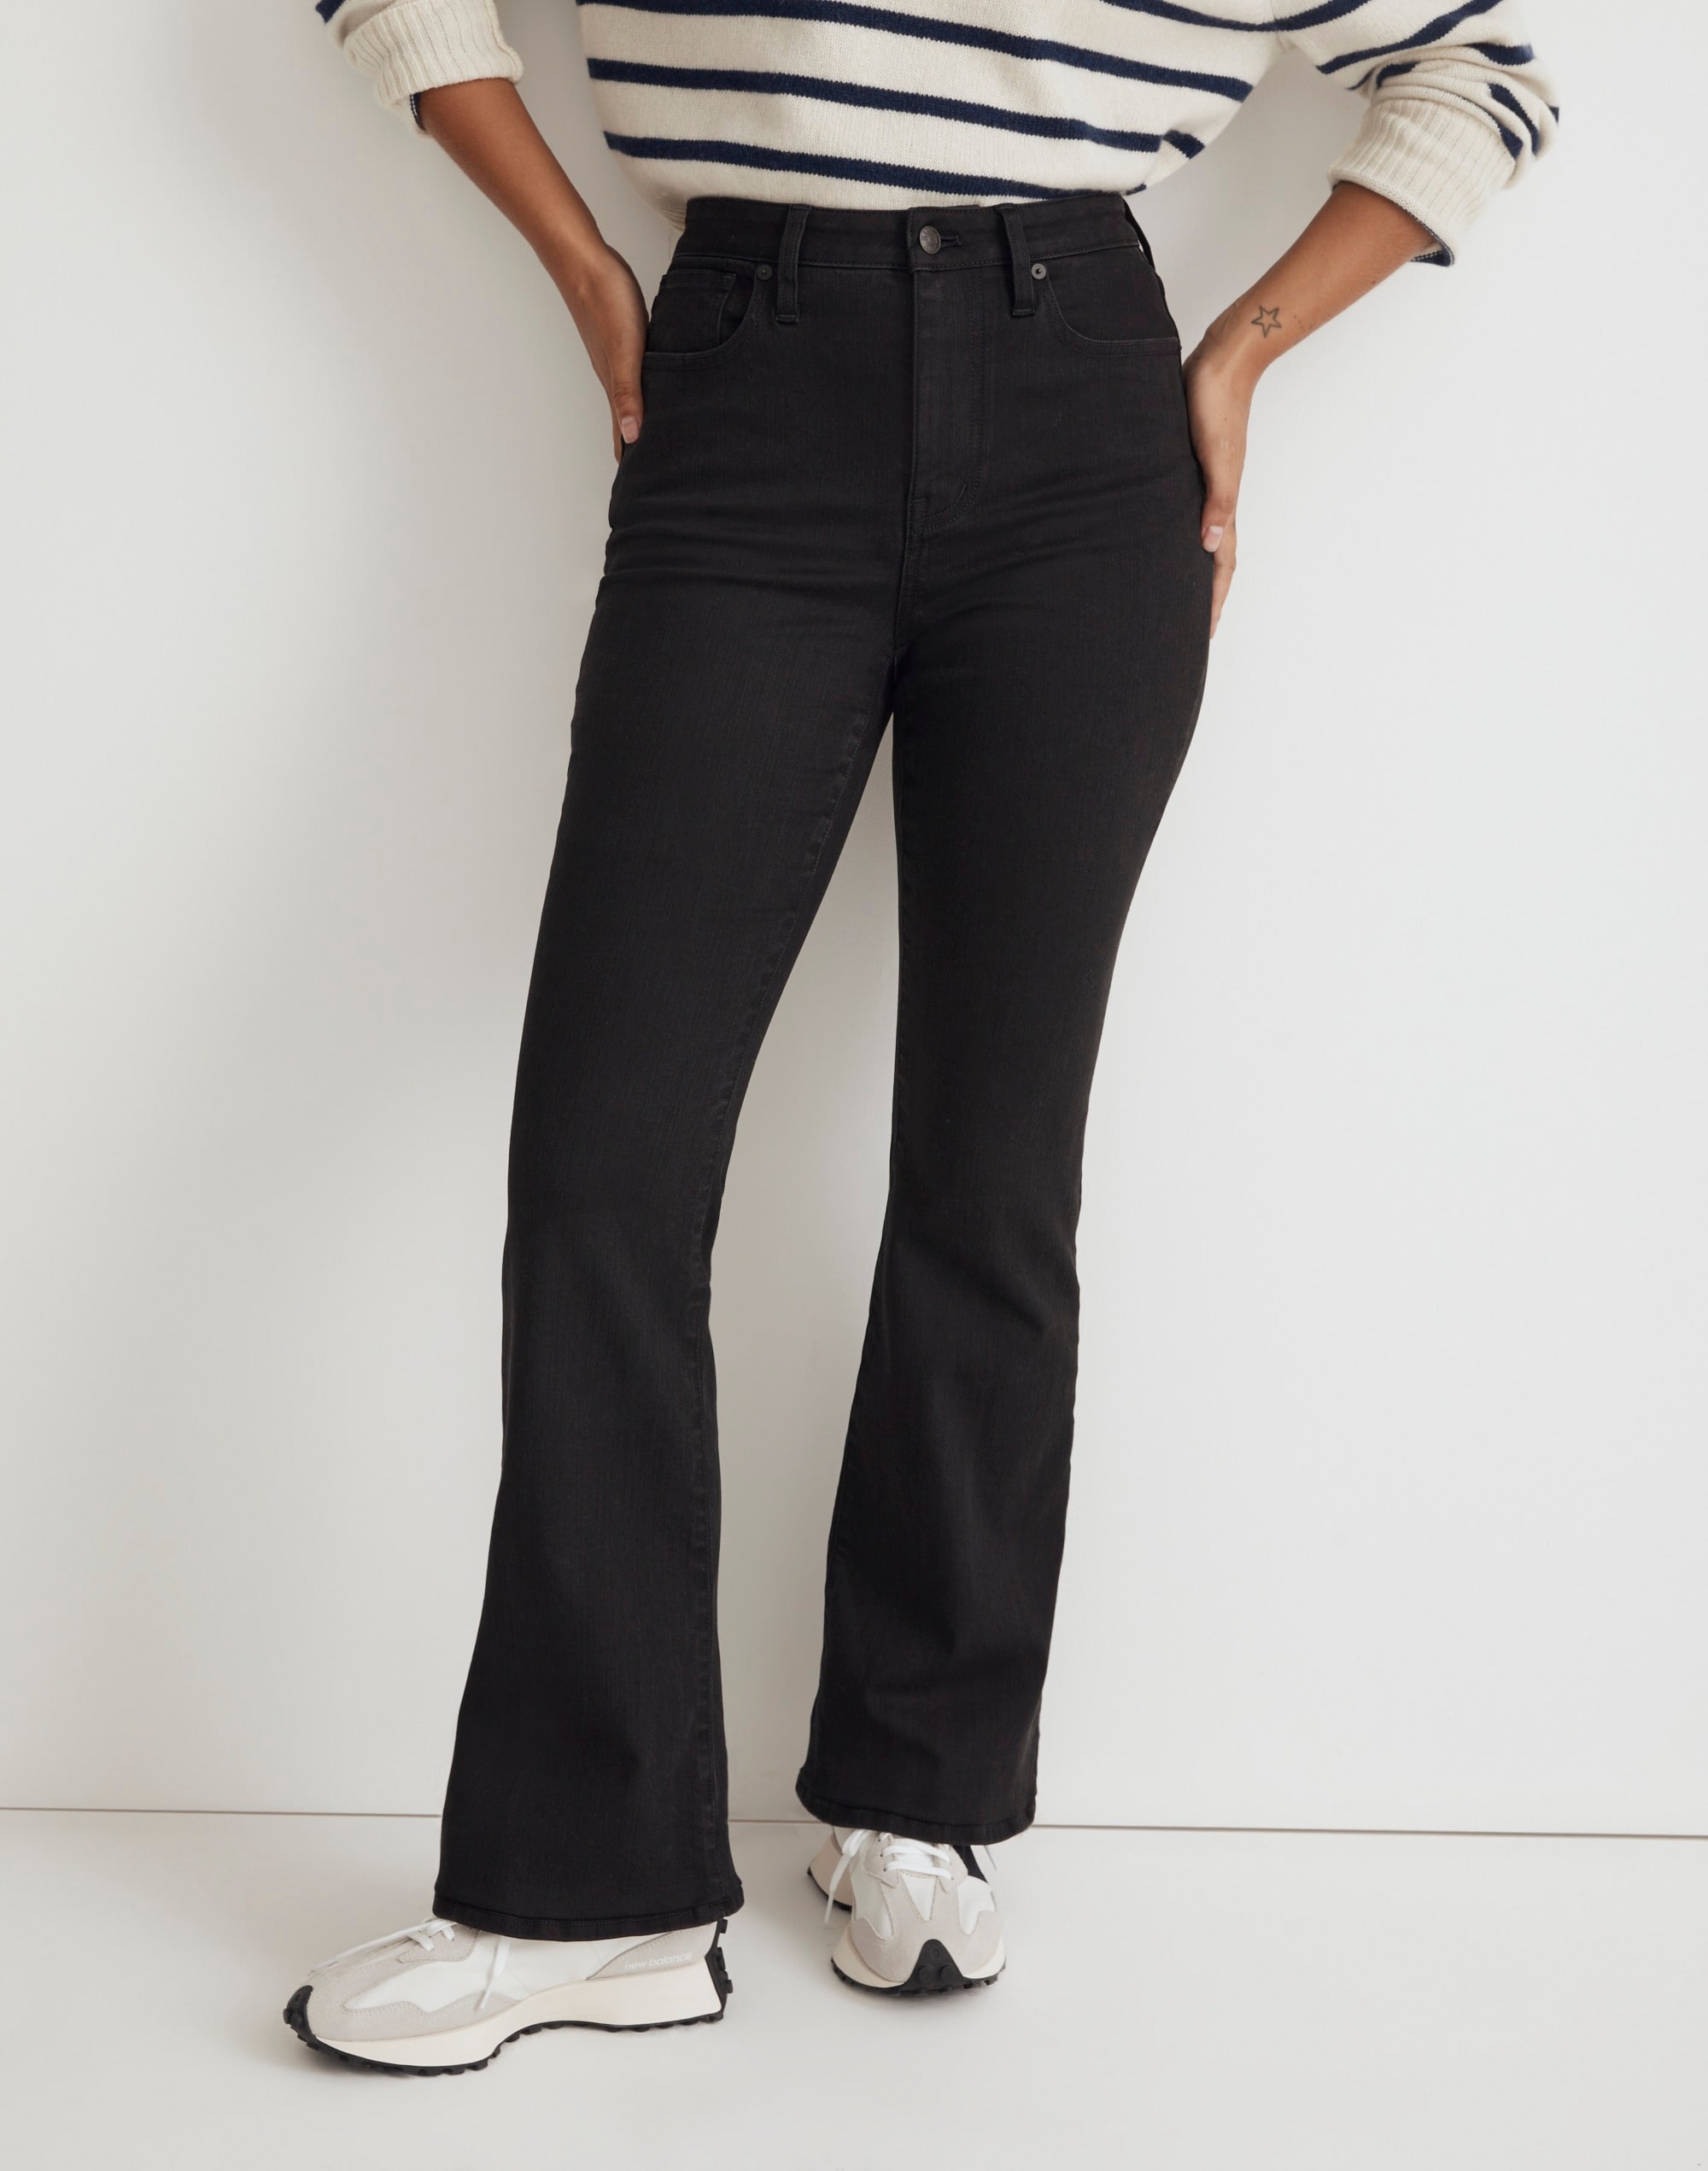 Curvy Skinny Flare Jeans Black Frost Wash